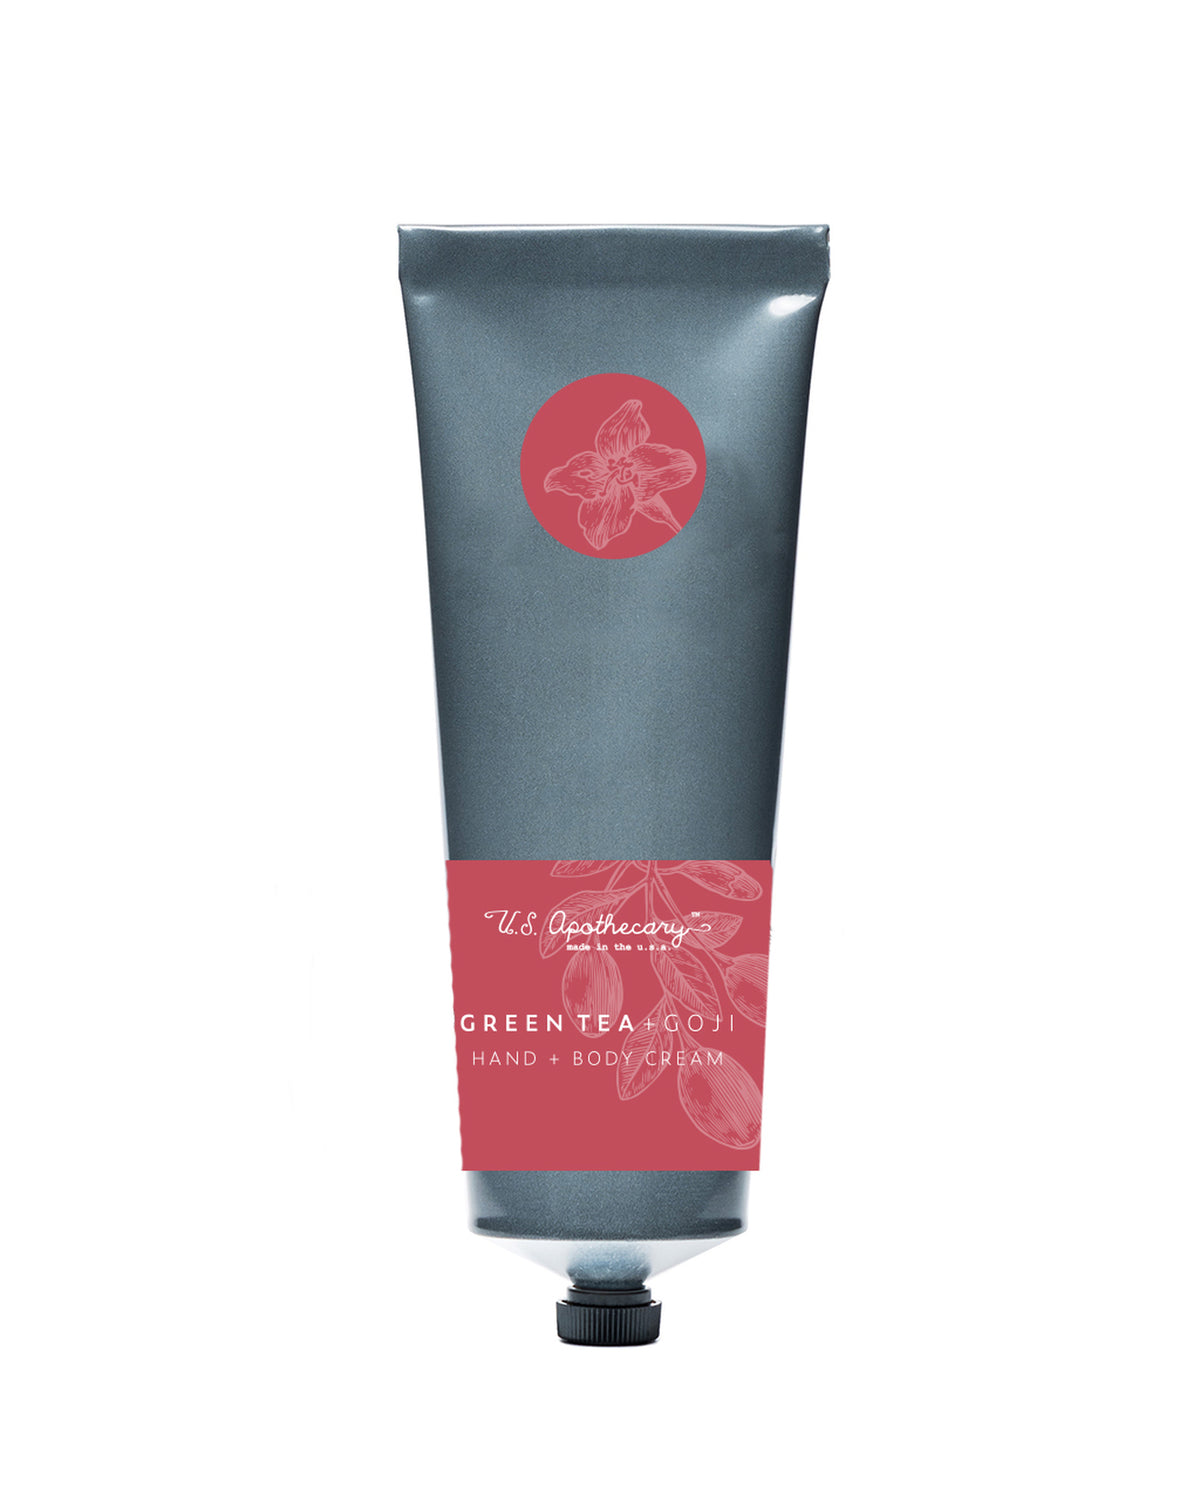 A tube of U.S. Apothecary Green Tea + Goji Berry hand and body cream labeled in elegant script on a sleek, gray background with a pink and red decorated label featuring botanical artwork.